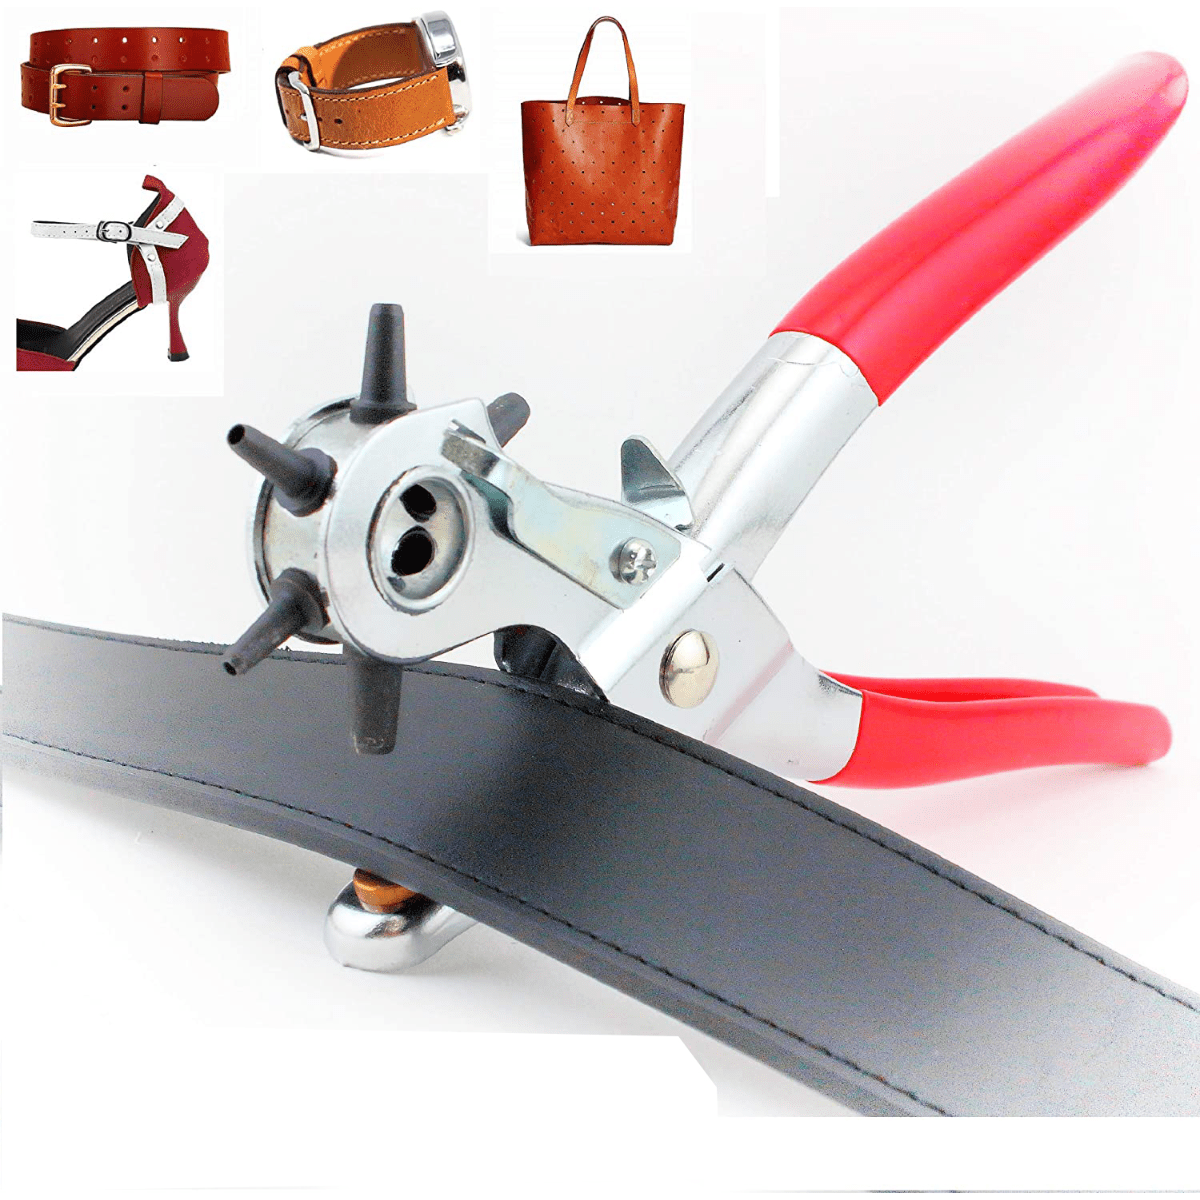 Leather Punch Tool Kit, Upgraded Belt Hole Puncher For Leather, Saddles,  Shoes, Fabric, Etc. Diy And Craft Projects, 6-hole Heavy Duty Rotary  Puncher, Easy To Make Precise Round Holes